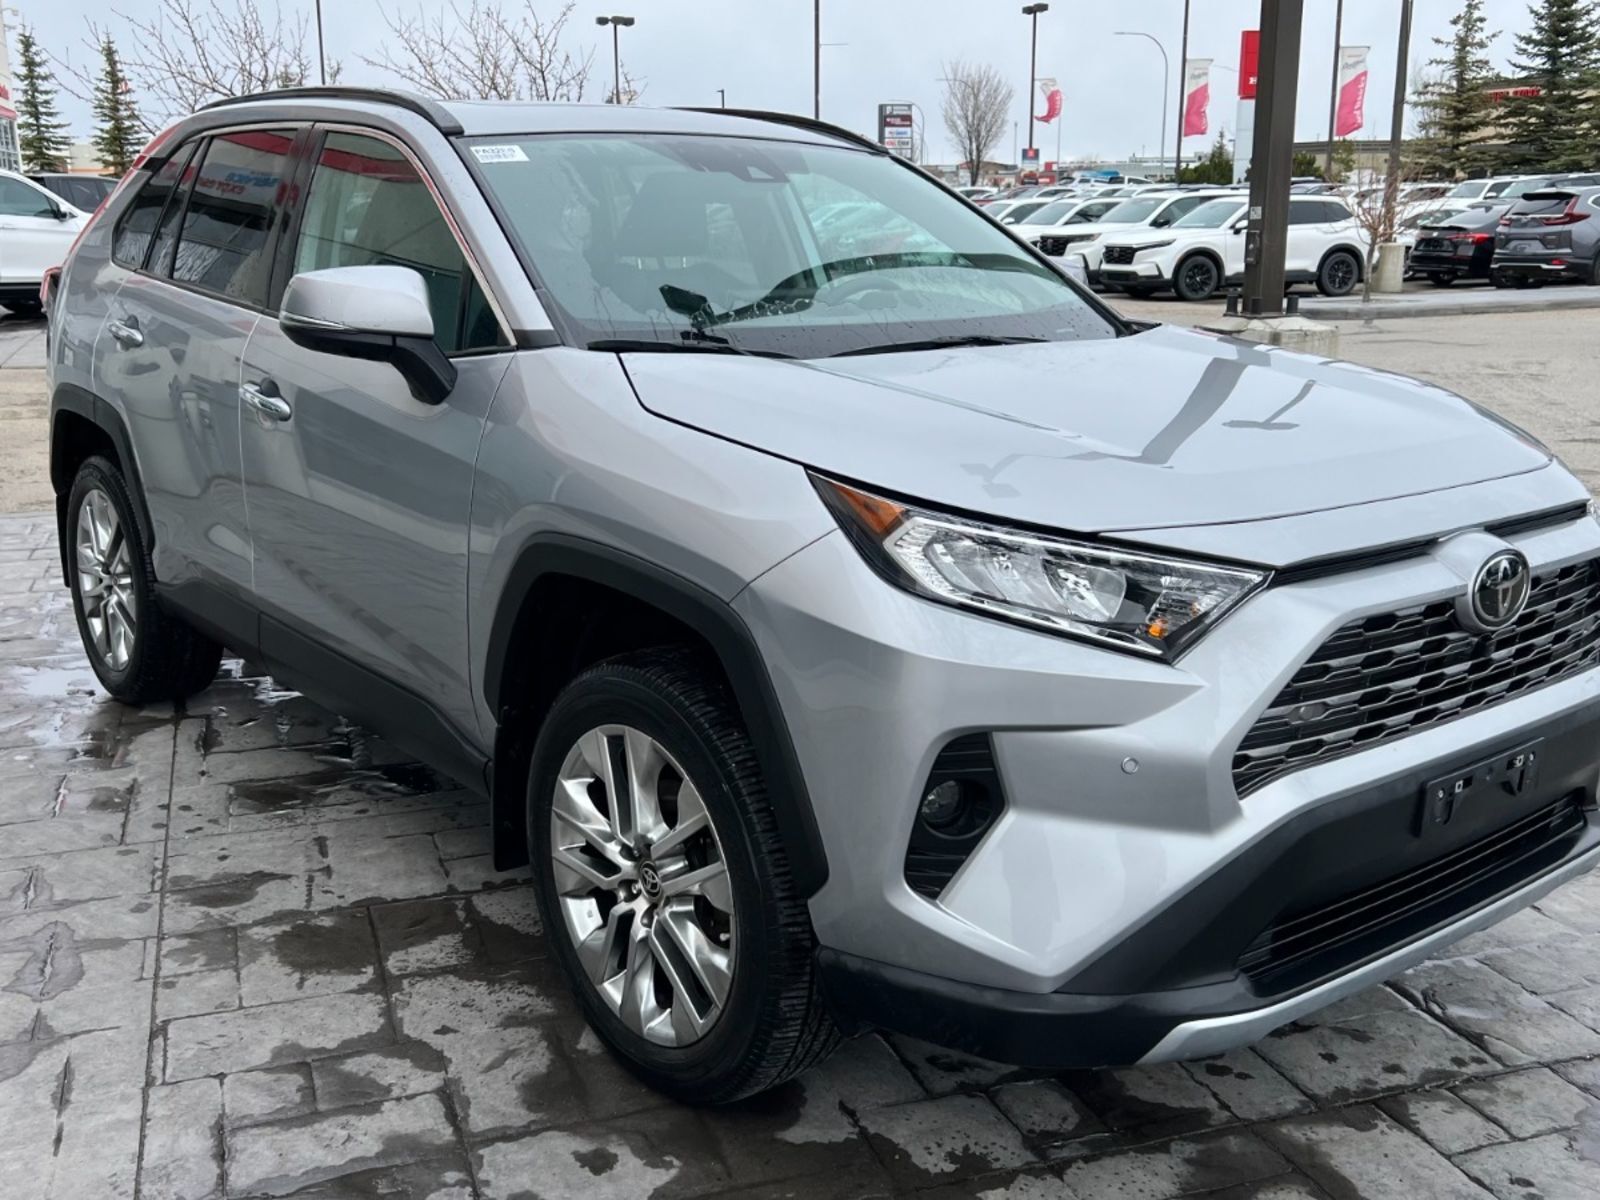 2021 Toyota RAV4 Limited - Low Kms, Heated Seats, Navigation System